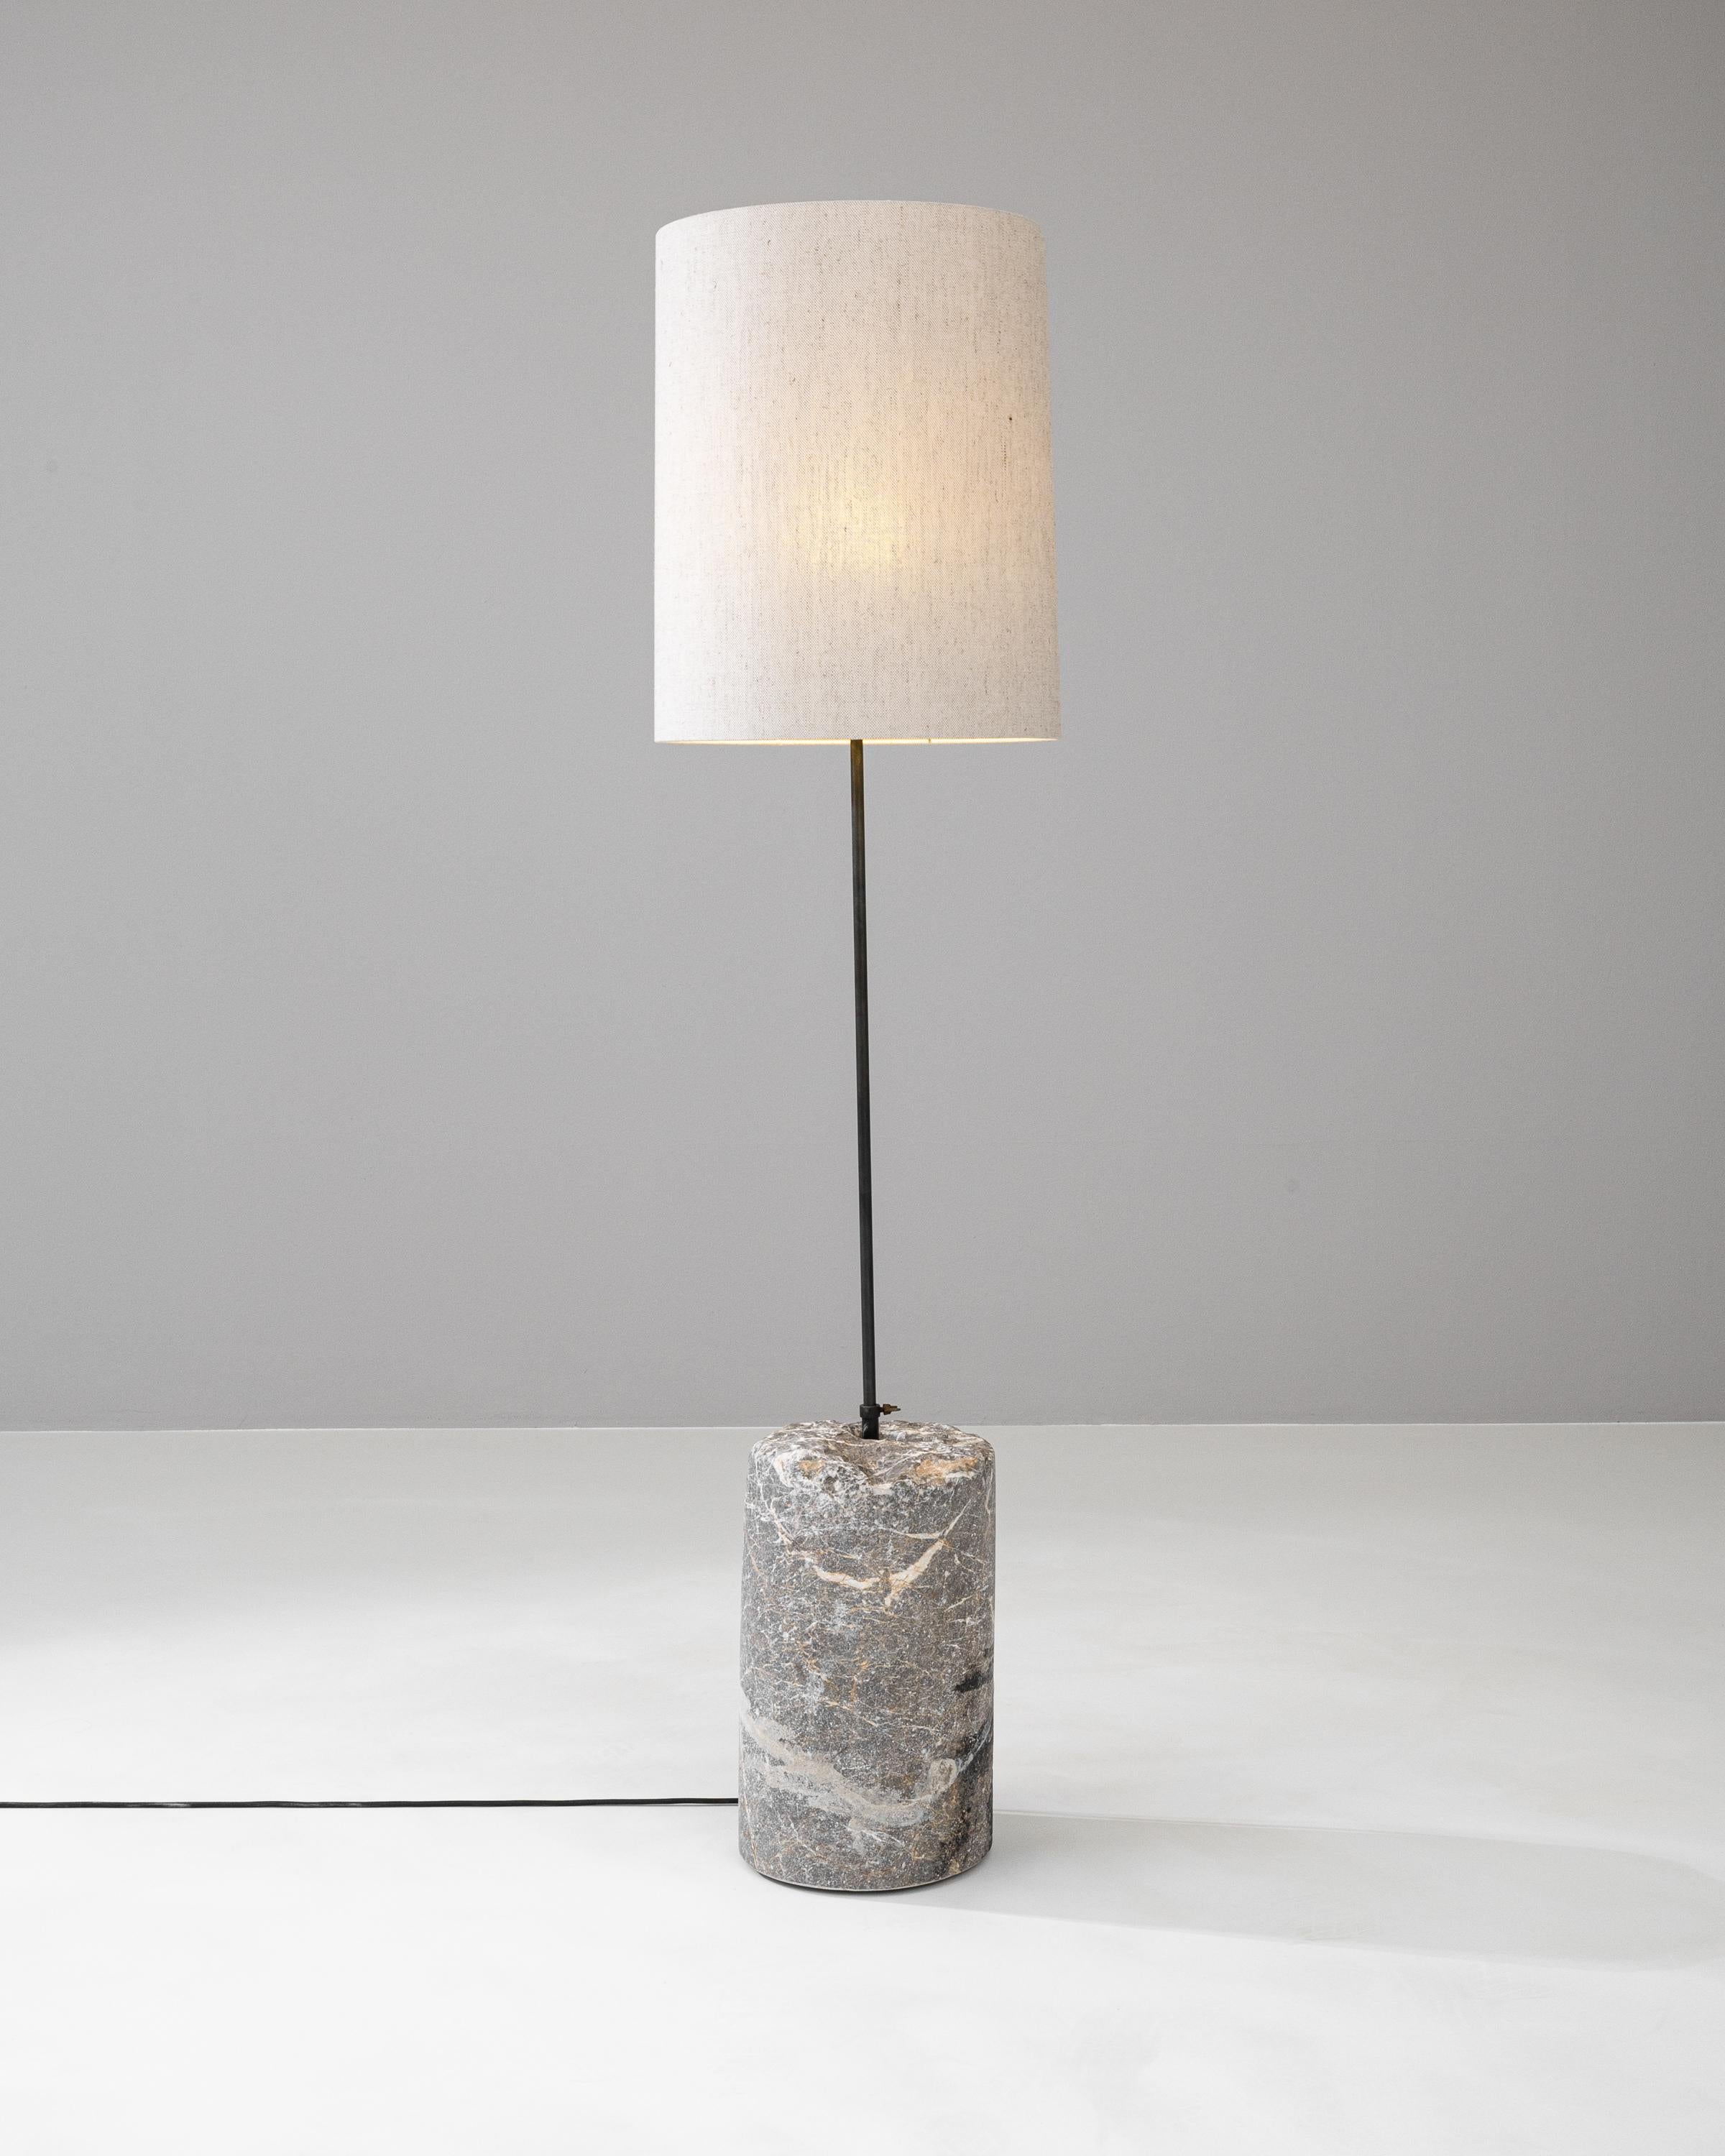 Illuminate your space with the timeless elegance of the 1900s European Marble & Metal Floor Lamp. A celebration of classic style and sophistication, this floor lamp features a genuine marble base, whose unique patterns and grey tones add an organic